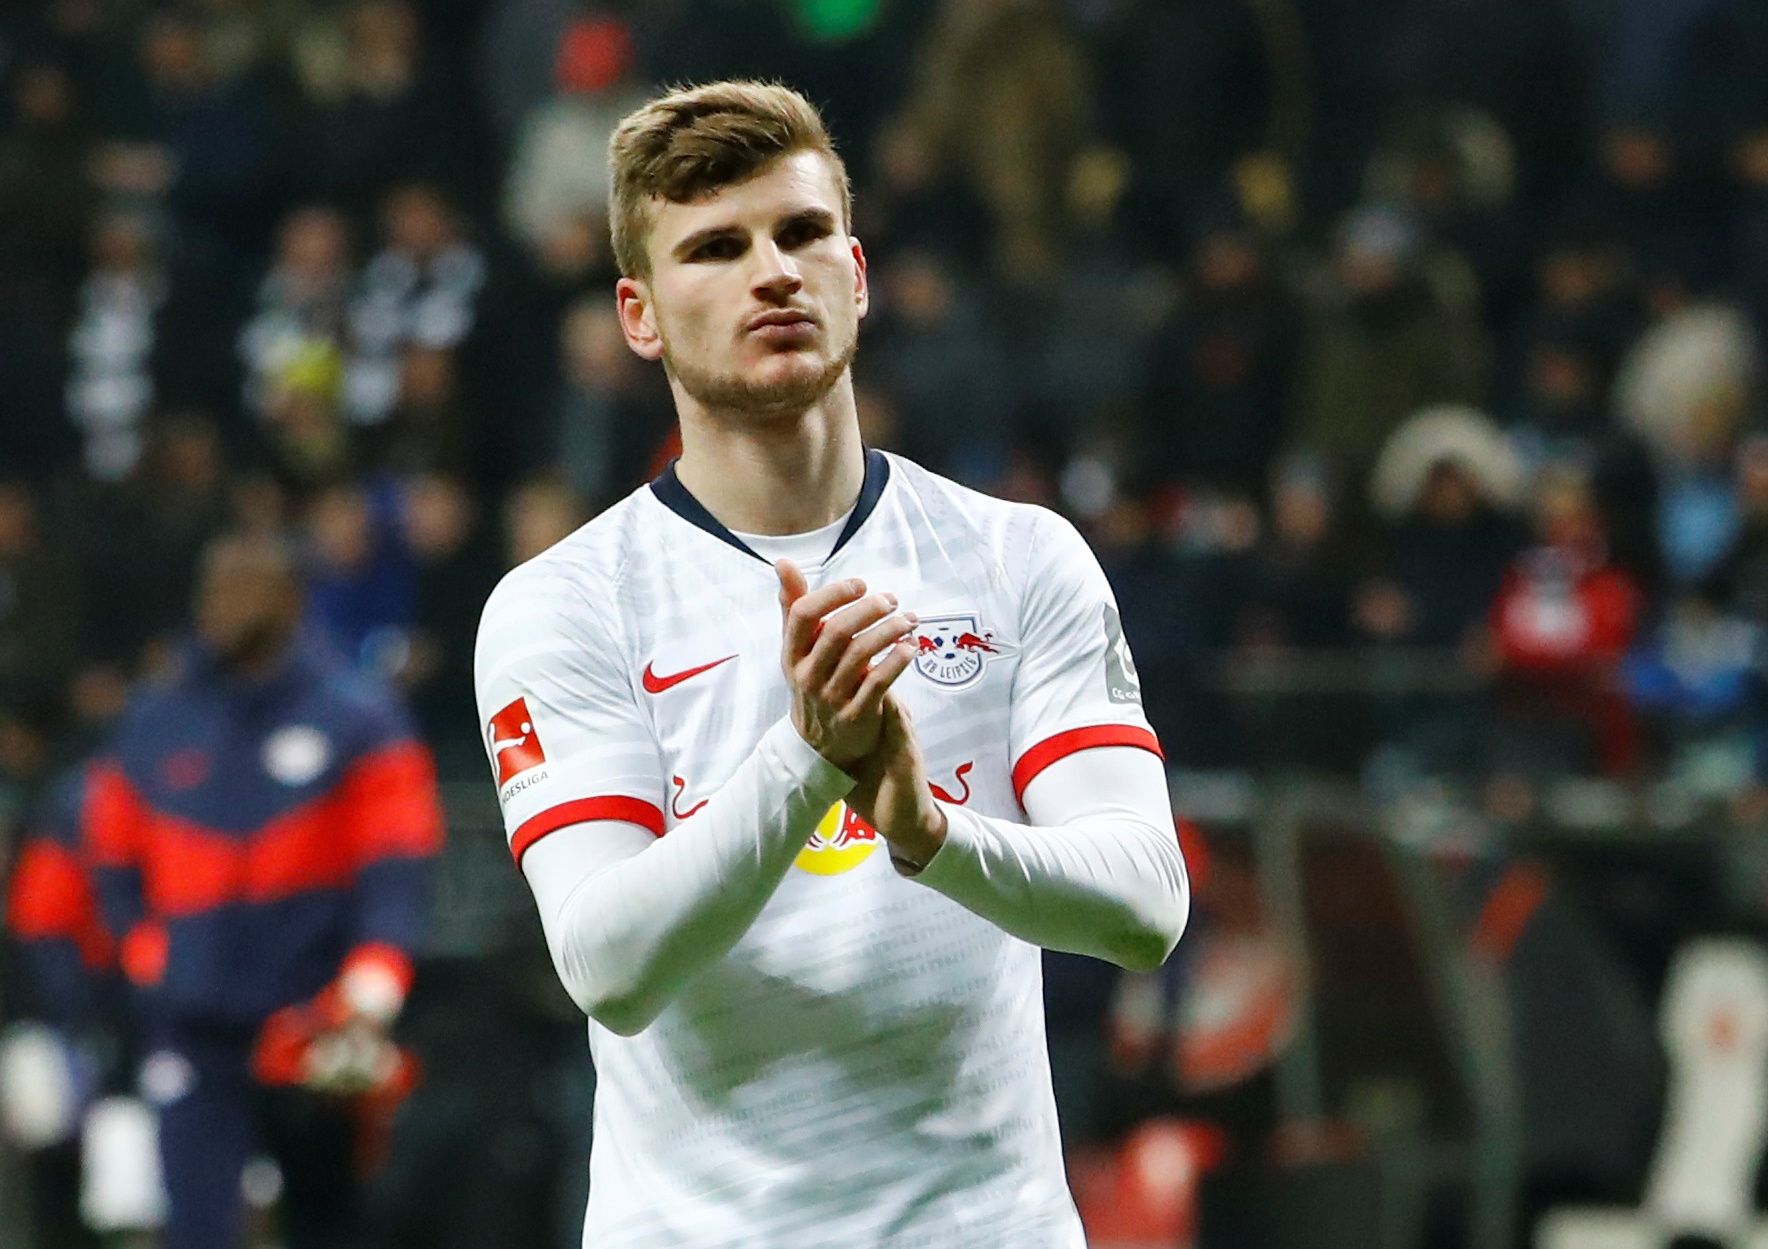 Soccer Football - Bundesliga - Eintracht Frankfurt v RB Leipzig - Commerzbank-Arena, Frankfurt, Germany - January 25, 2020  RB Leipzig's Timo Werner applauds fans after the match           REUTERS/Ralph Orlowski  DFL regulations prohibit any use of photographs as image sequences and/or quasi-video